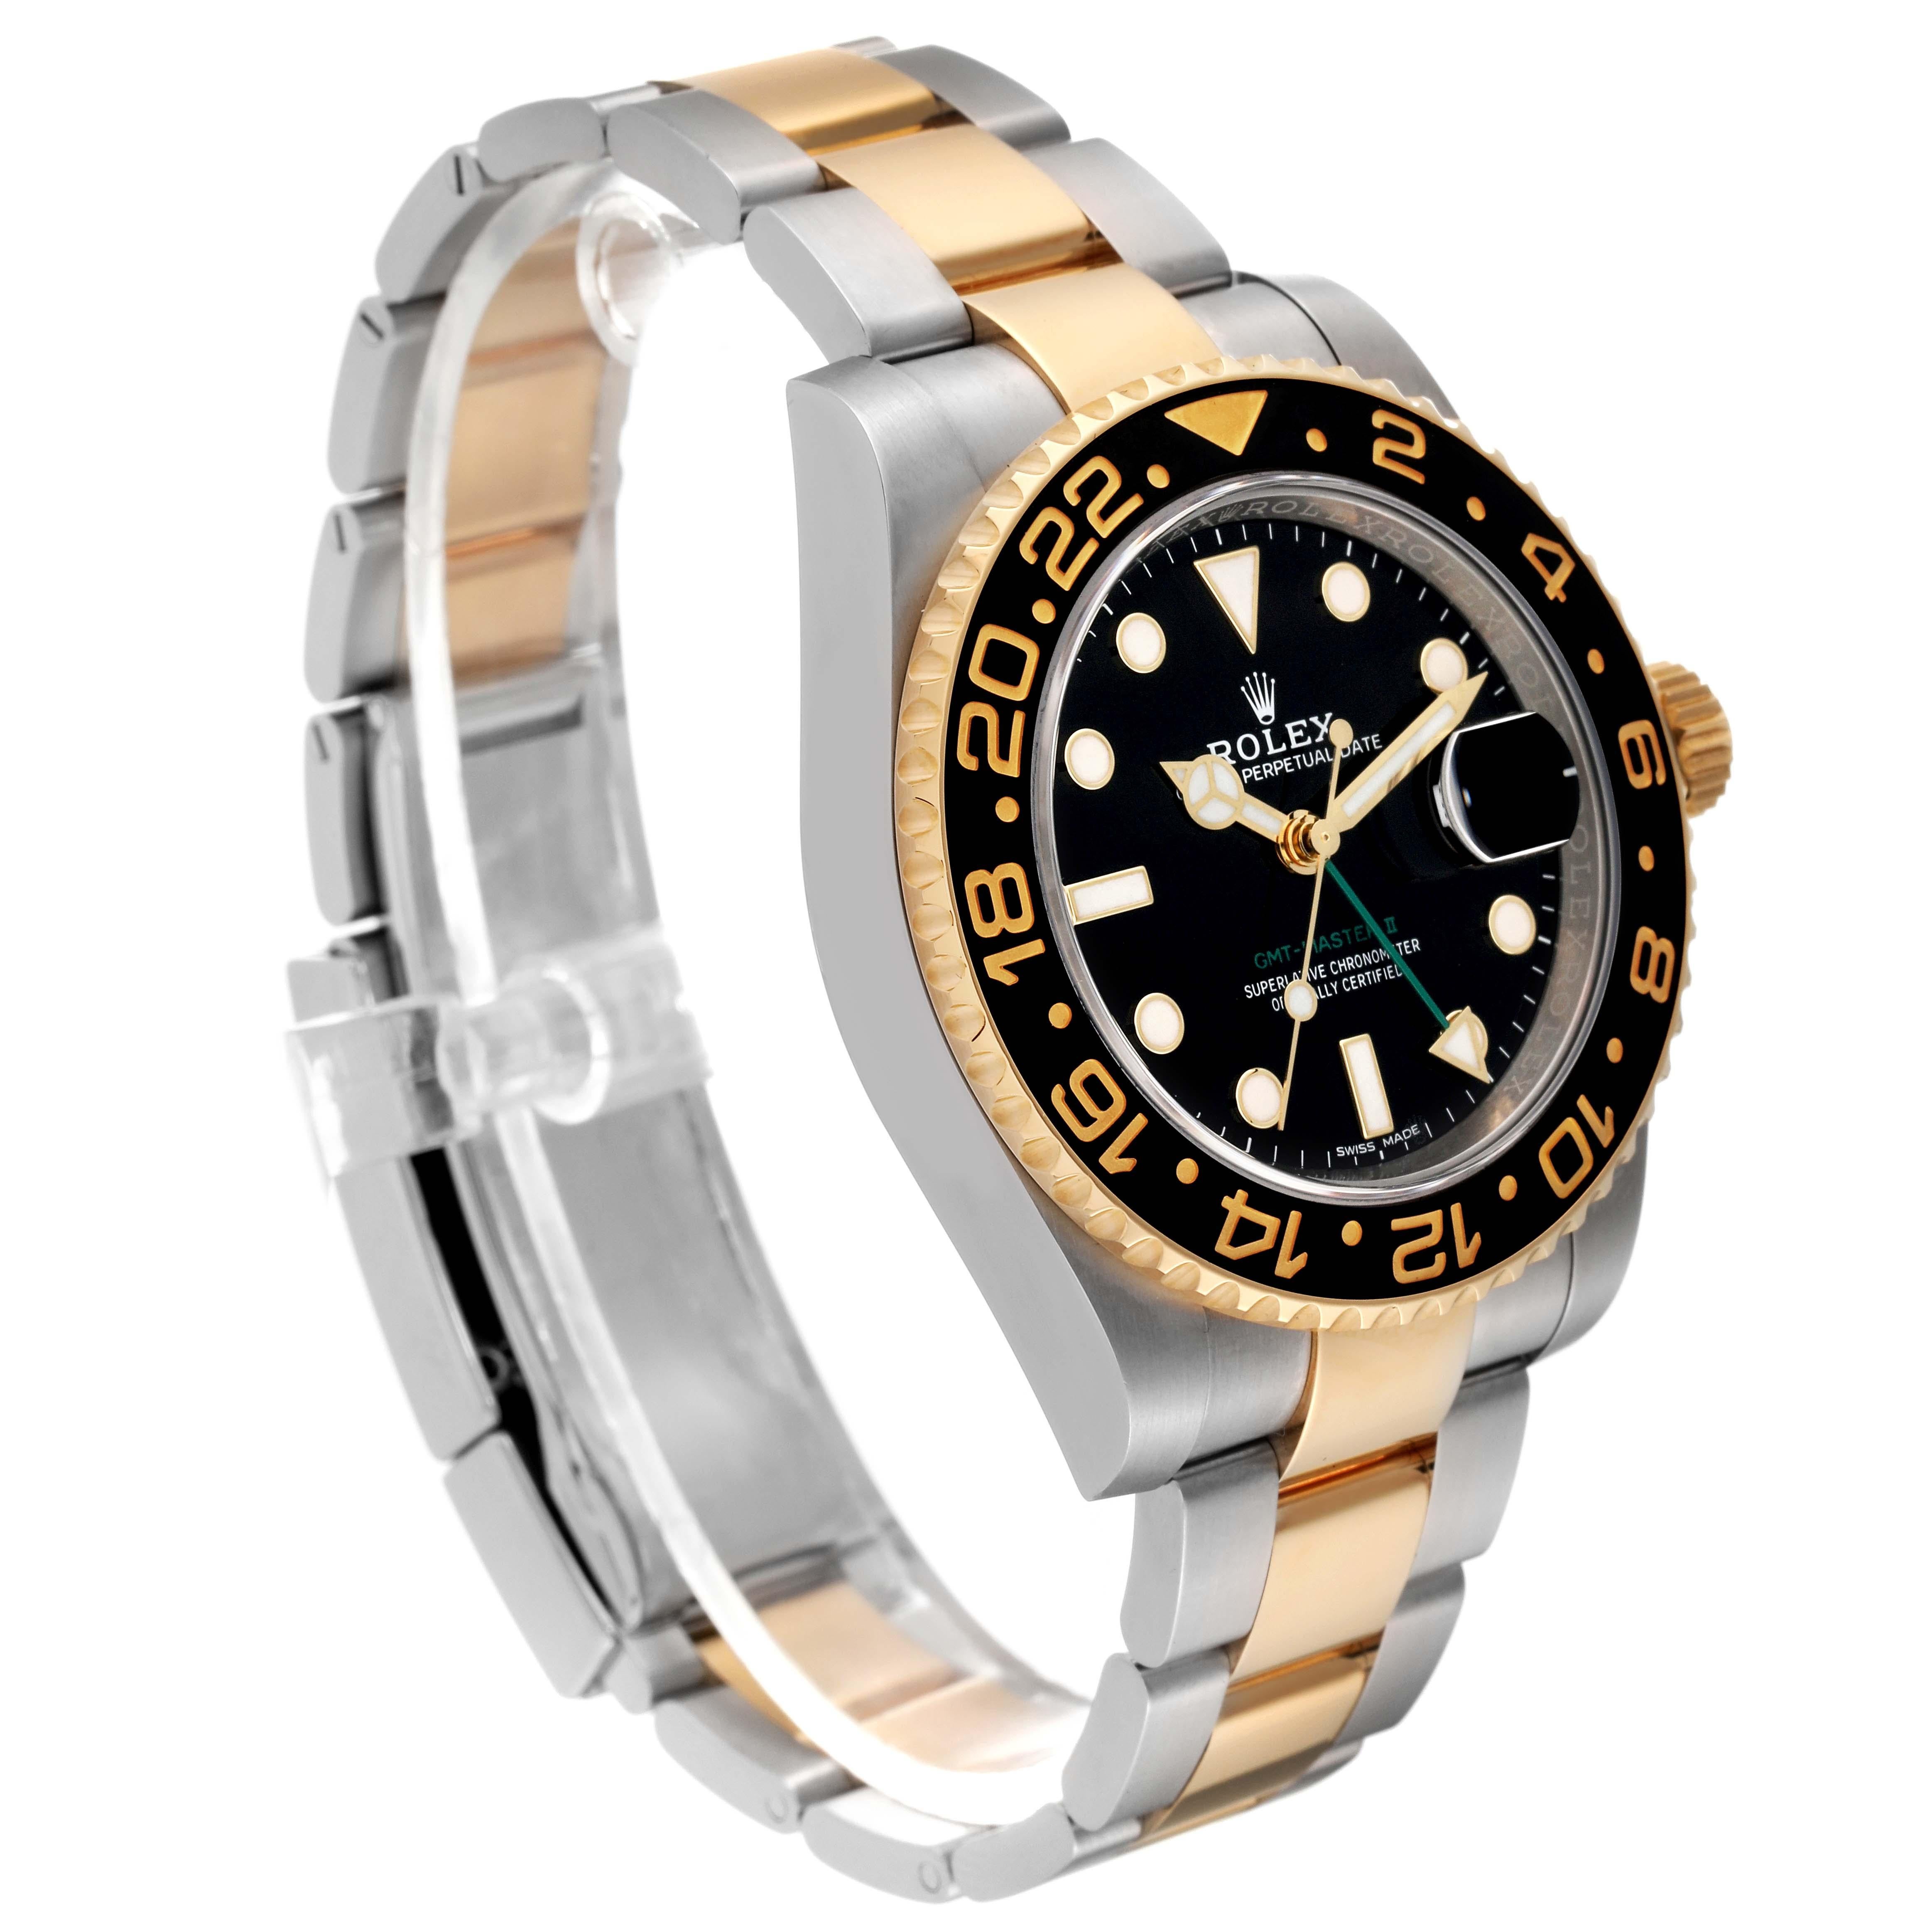 Rolex GMT Master II Steel Yellow Gold Black Dial Mens Watch 116713 Box Card 6